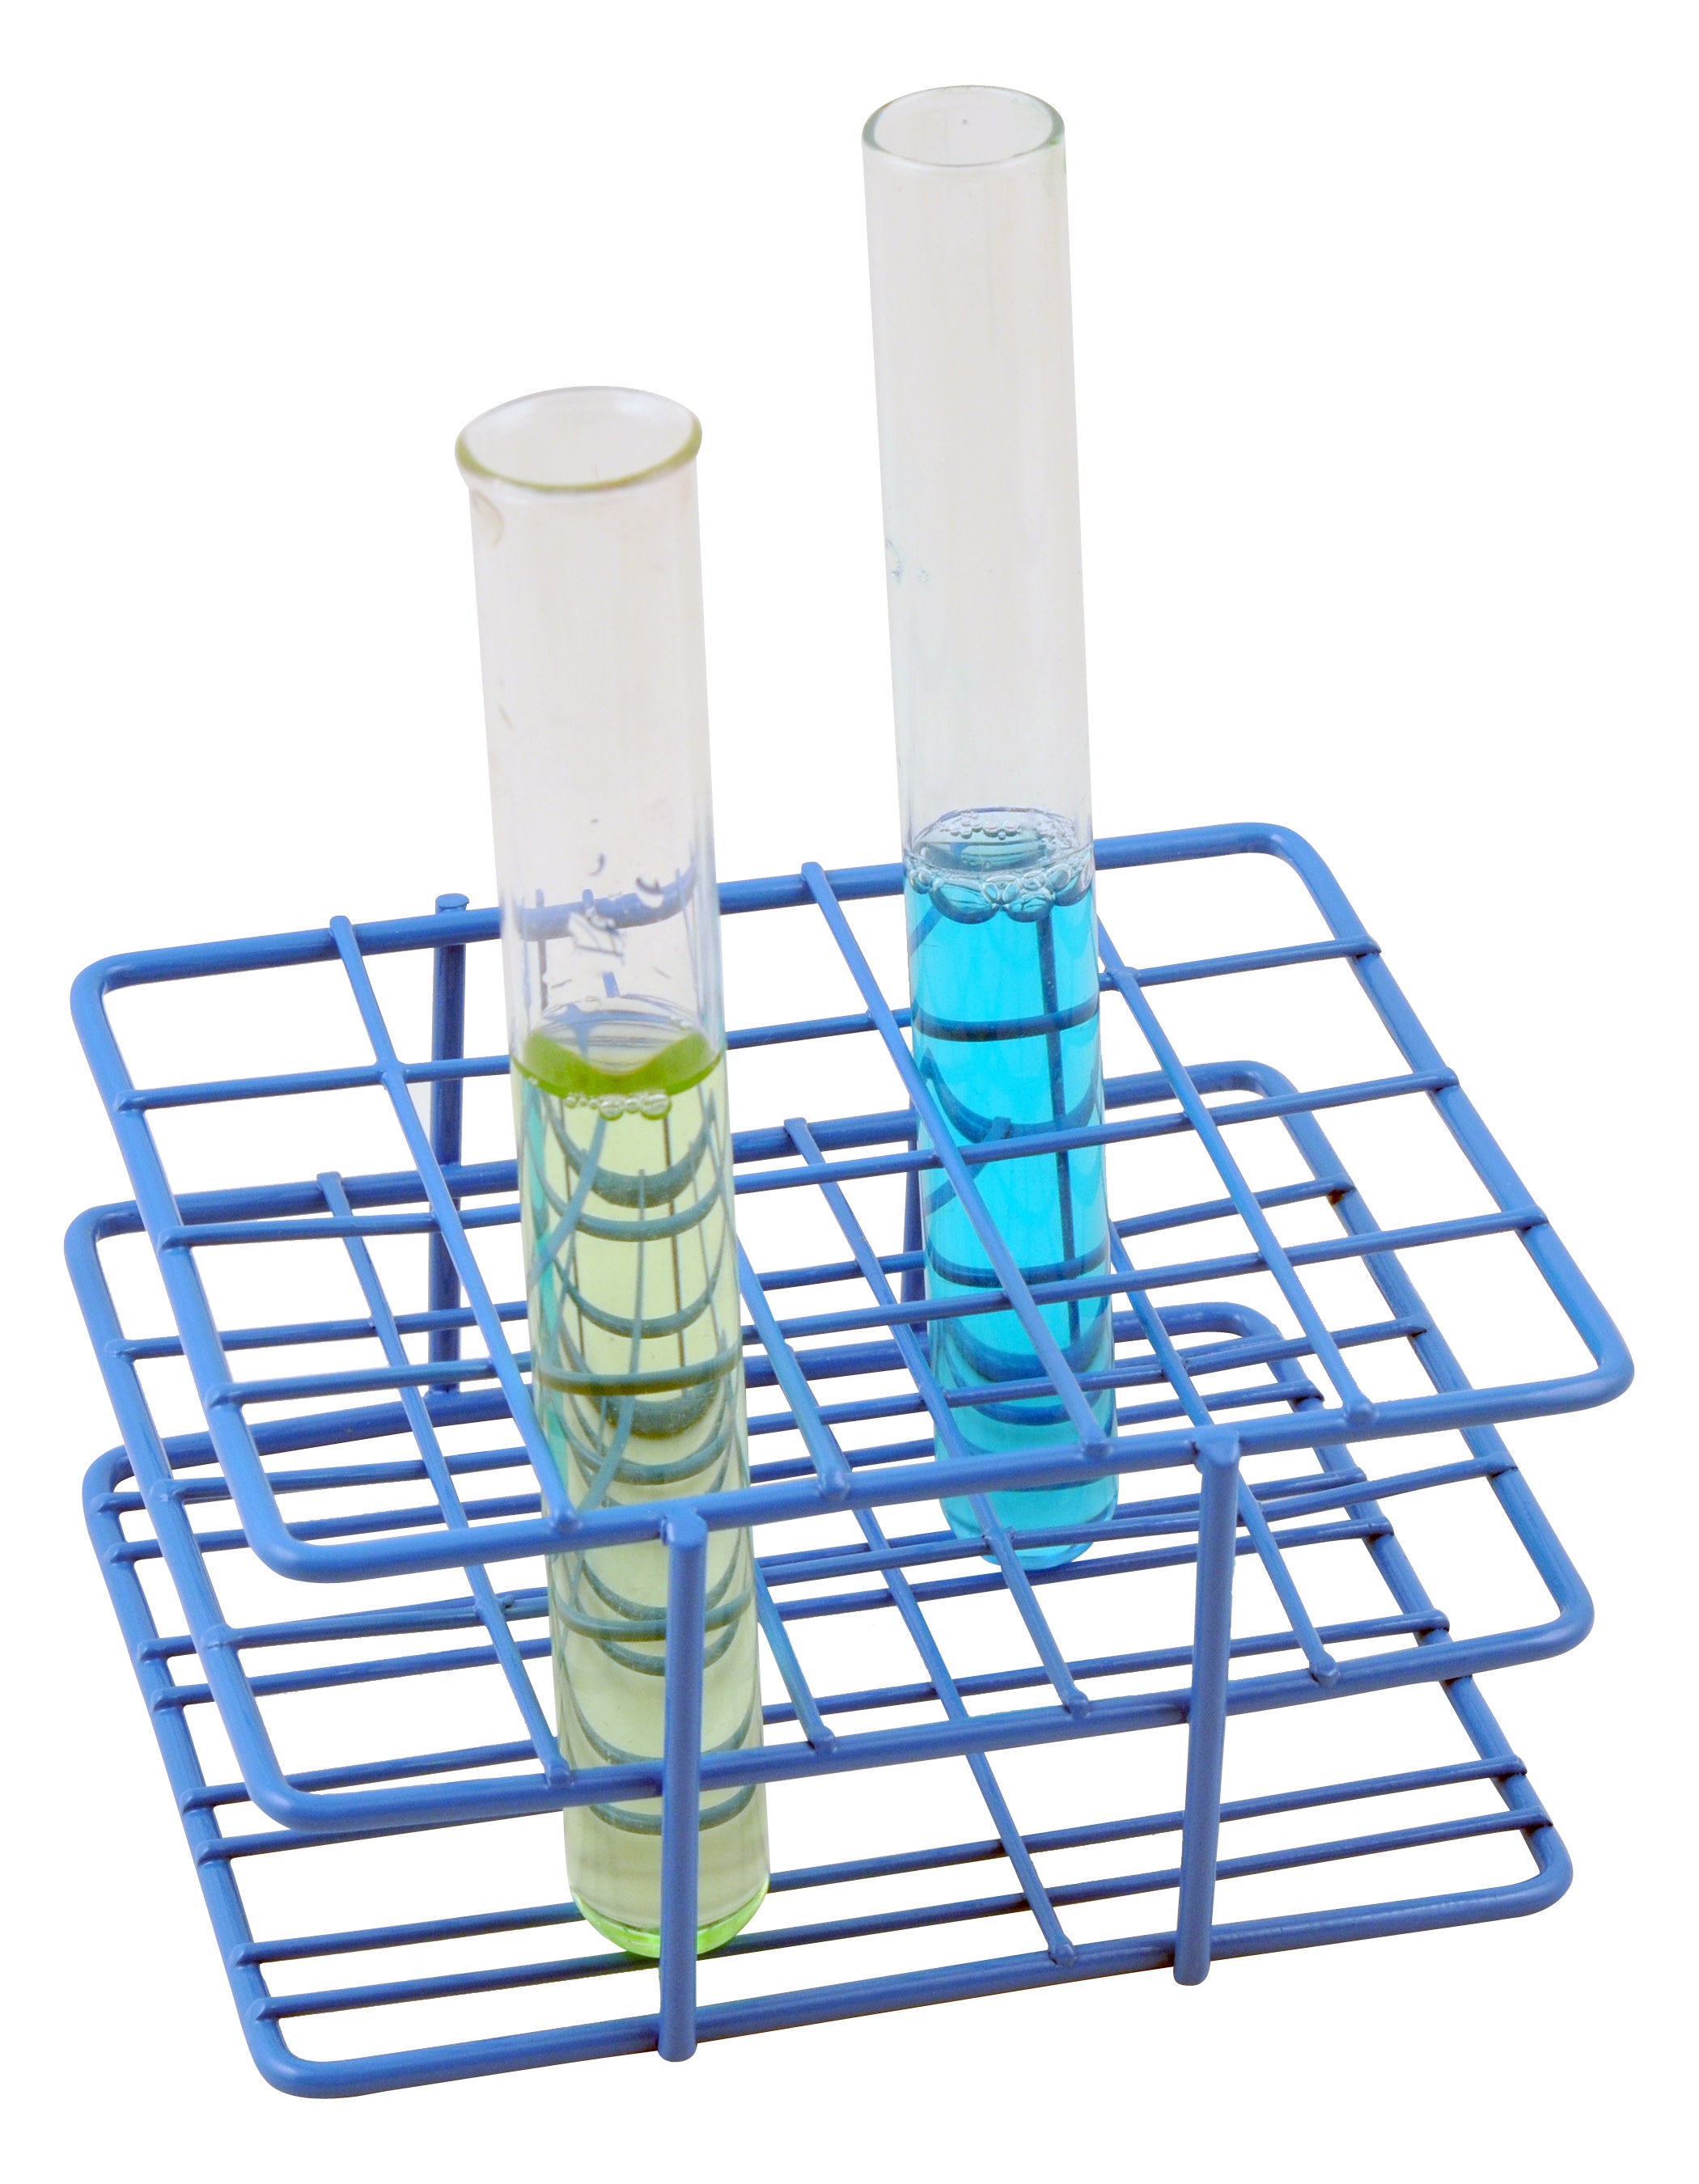 Blue Epoxy Coated Steel Wire Test Tube Rack, 20 Tubes (18-20mm), 4 X 5 Format